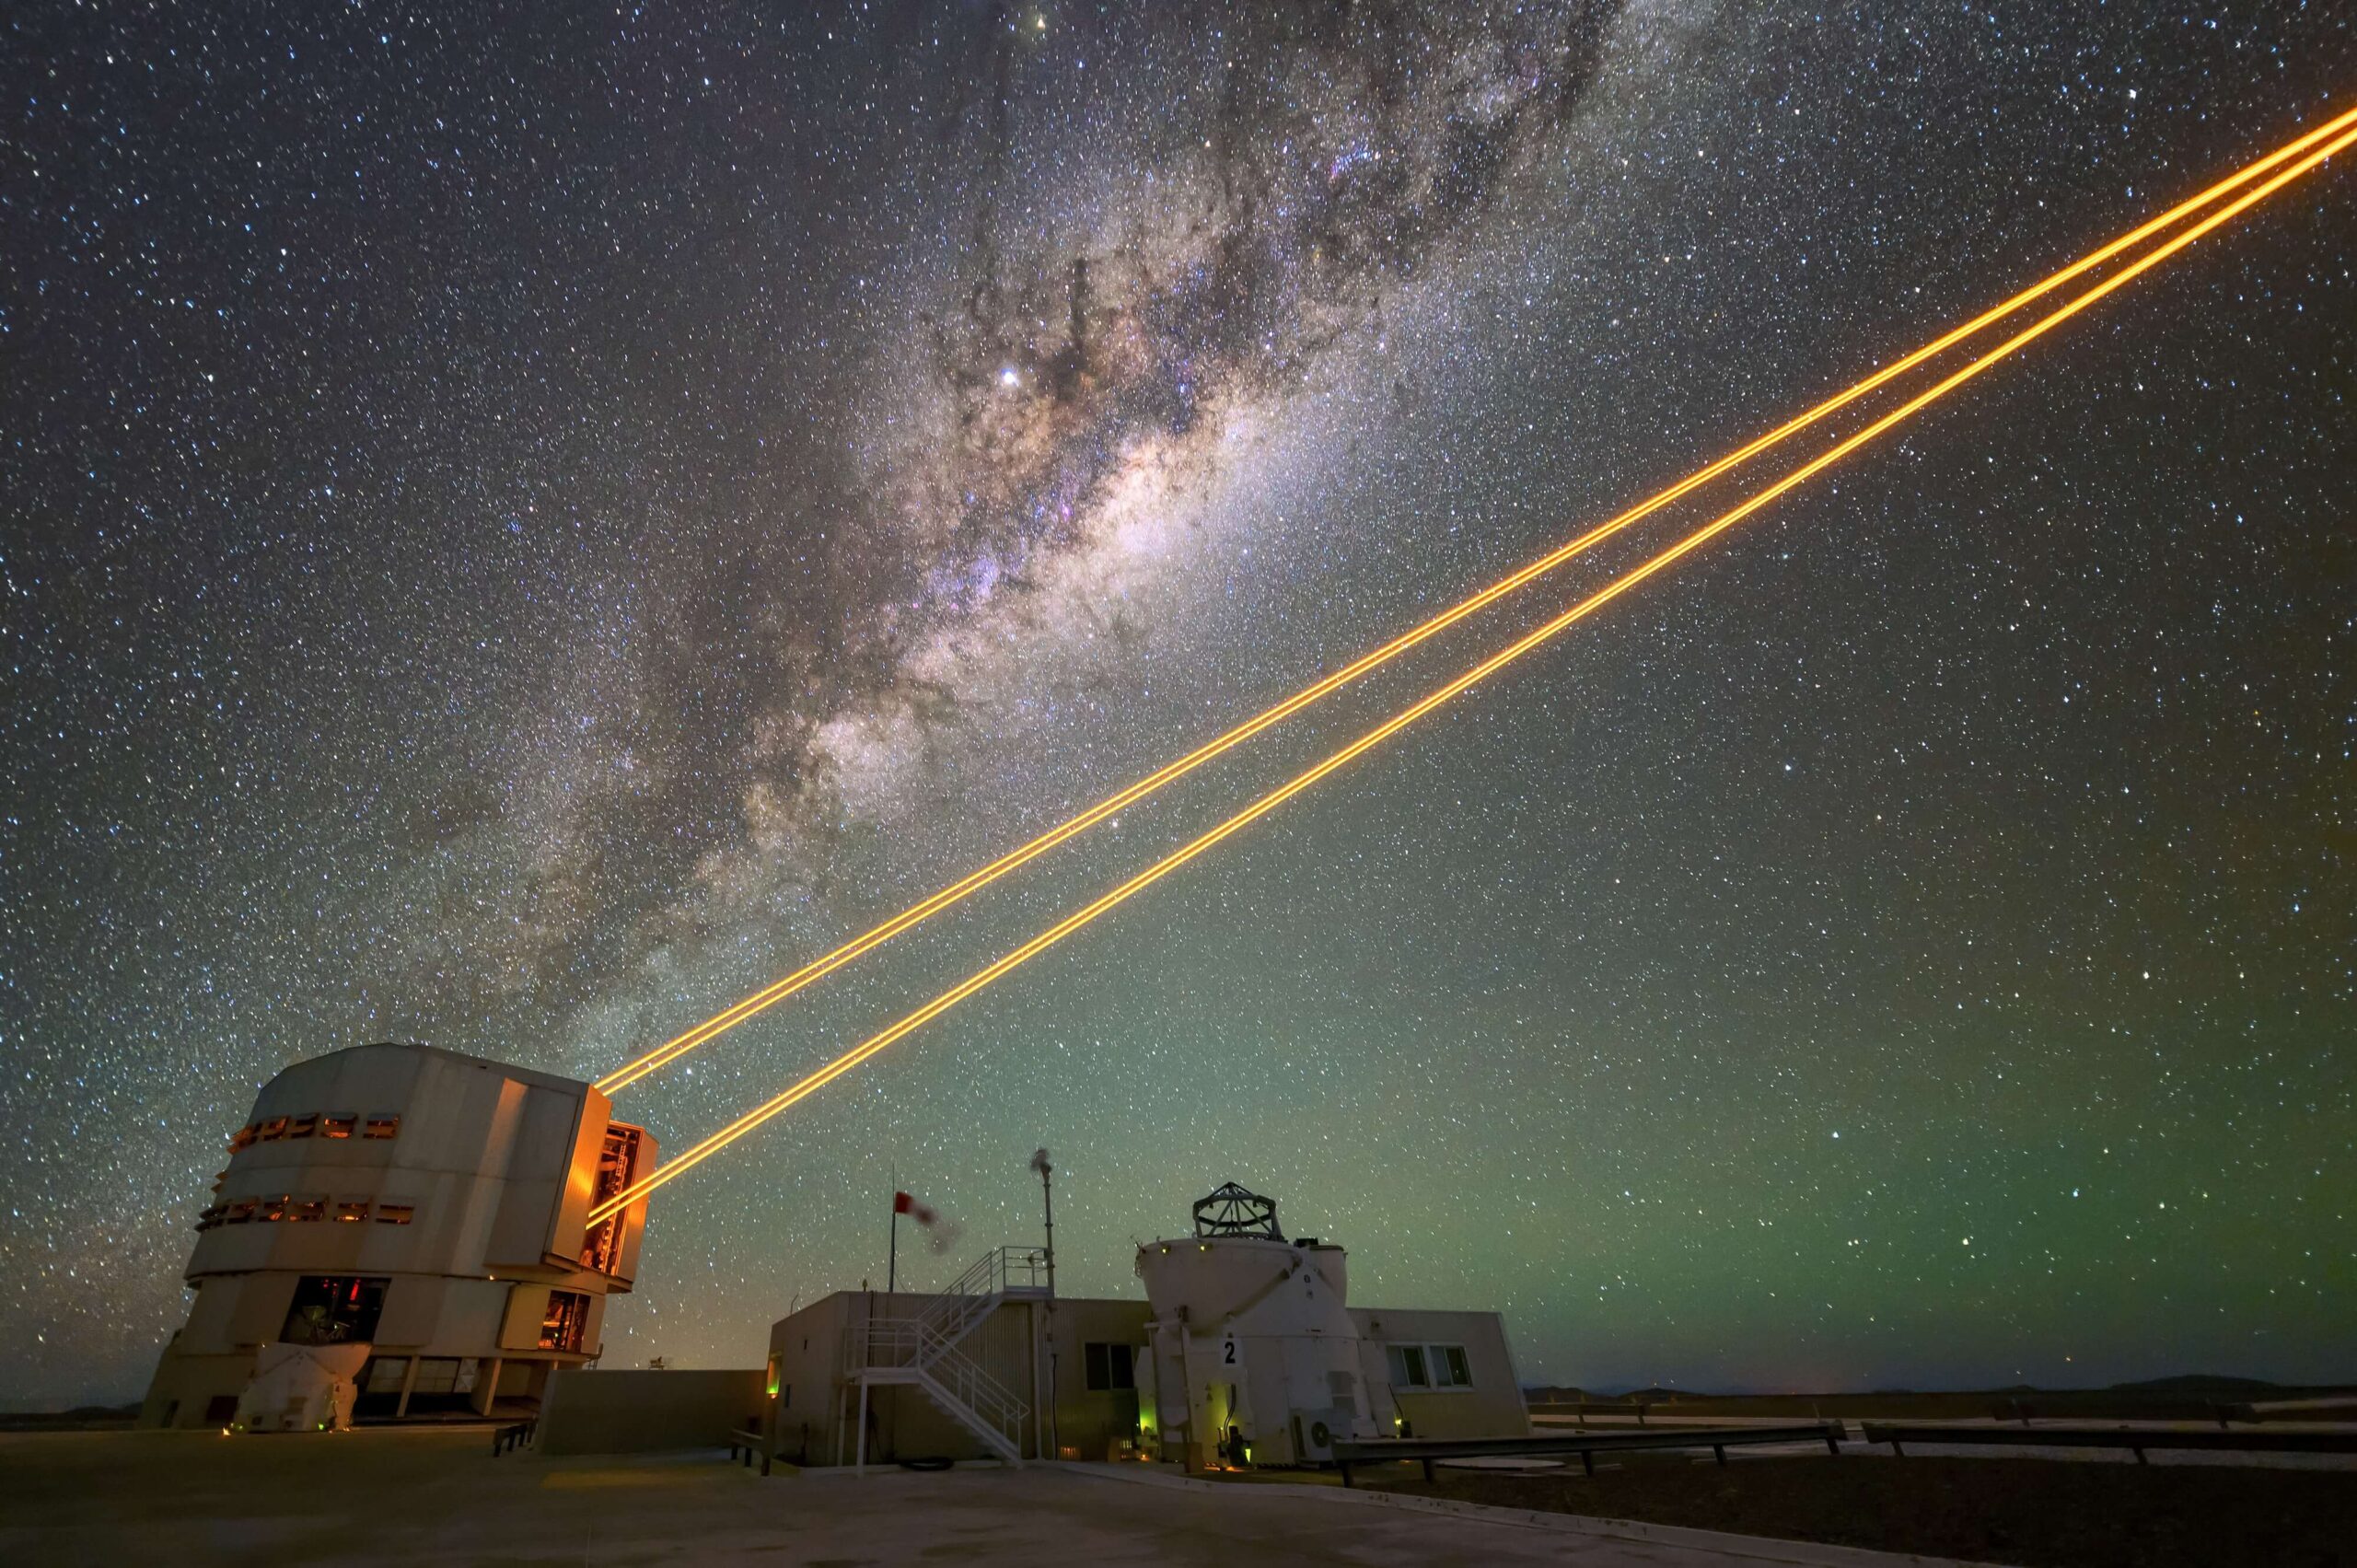 An image from the European Southern Observatory showing lasers guiding a high-powered telescope. 